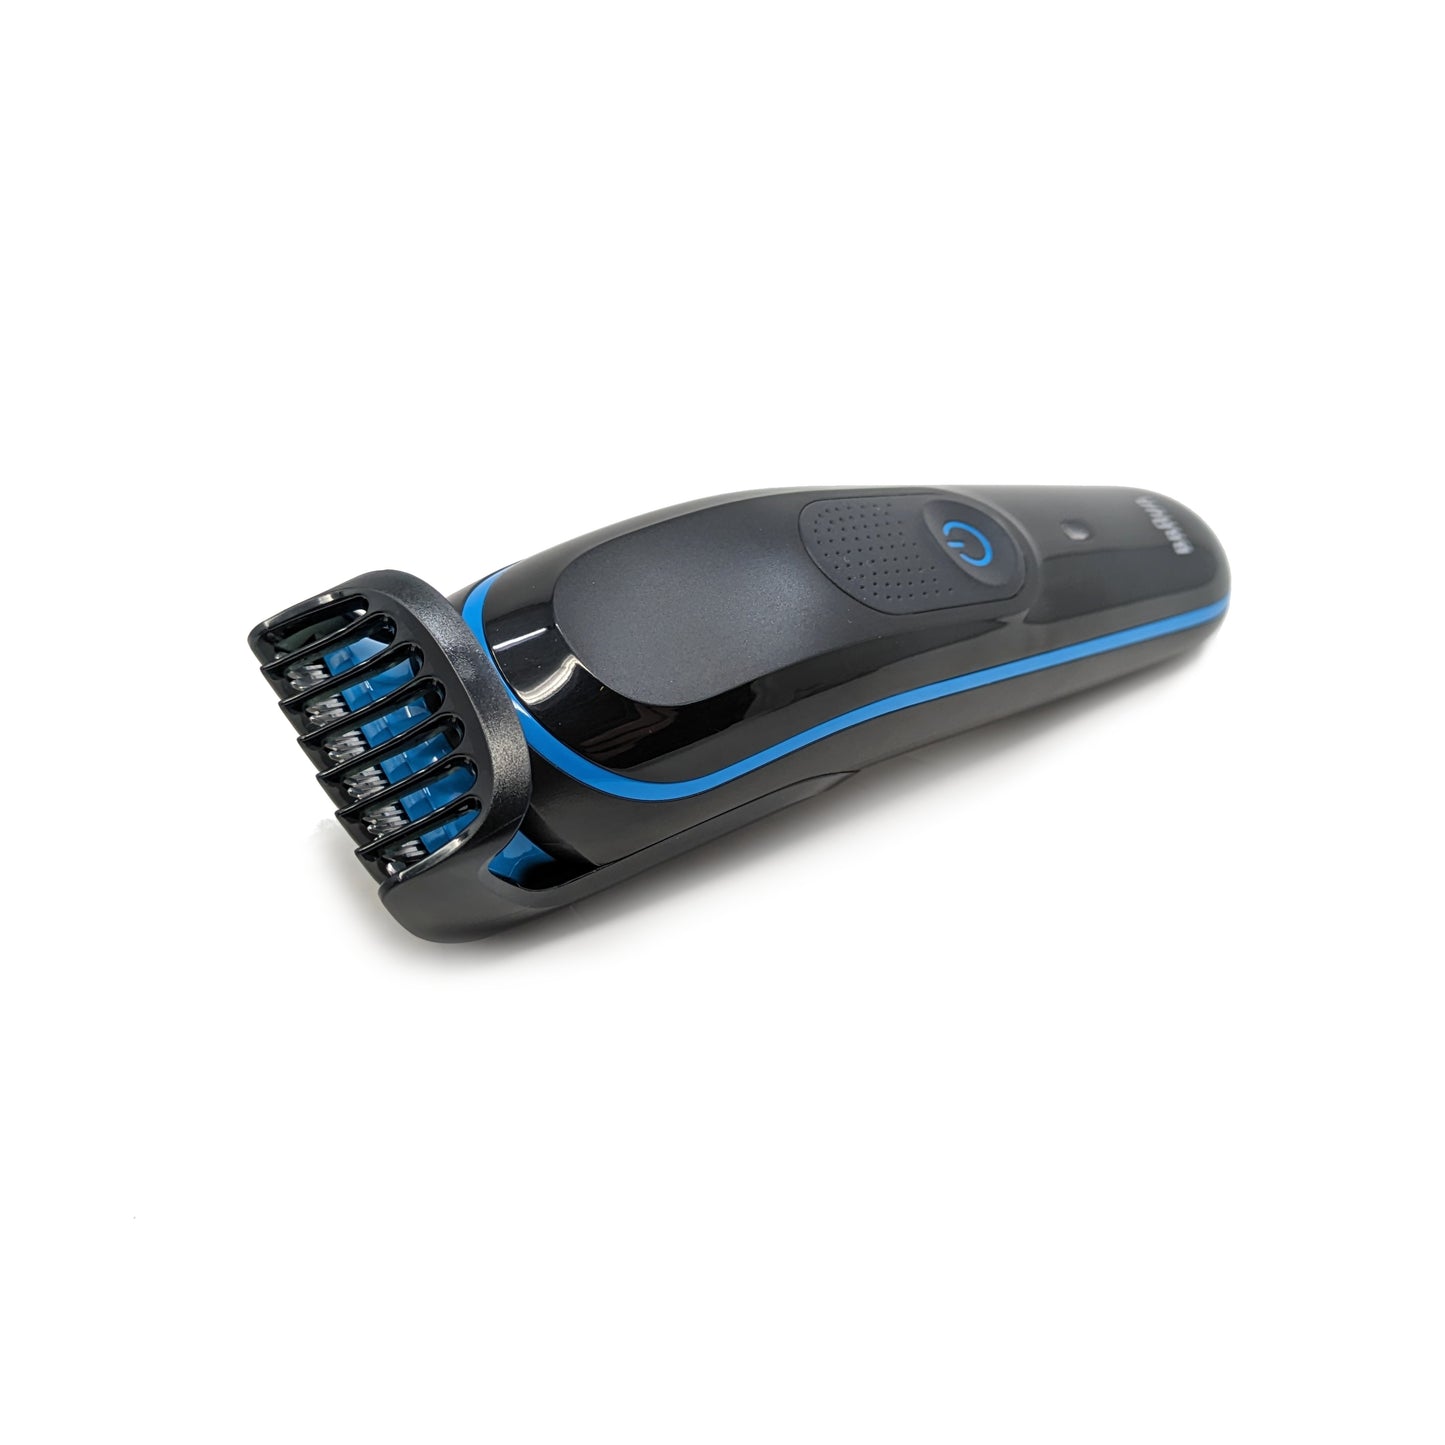 Braun 7-in-1 All-in-one Trimmer 3 MGK3245 Black/Blue - Ex Display Imperfect Box